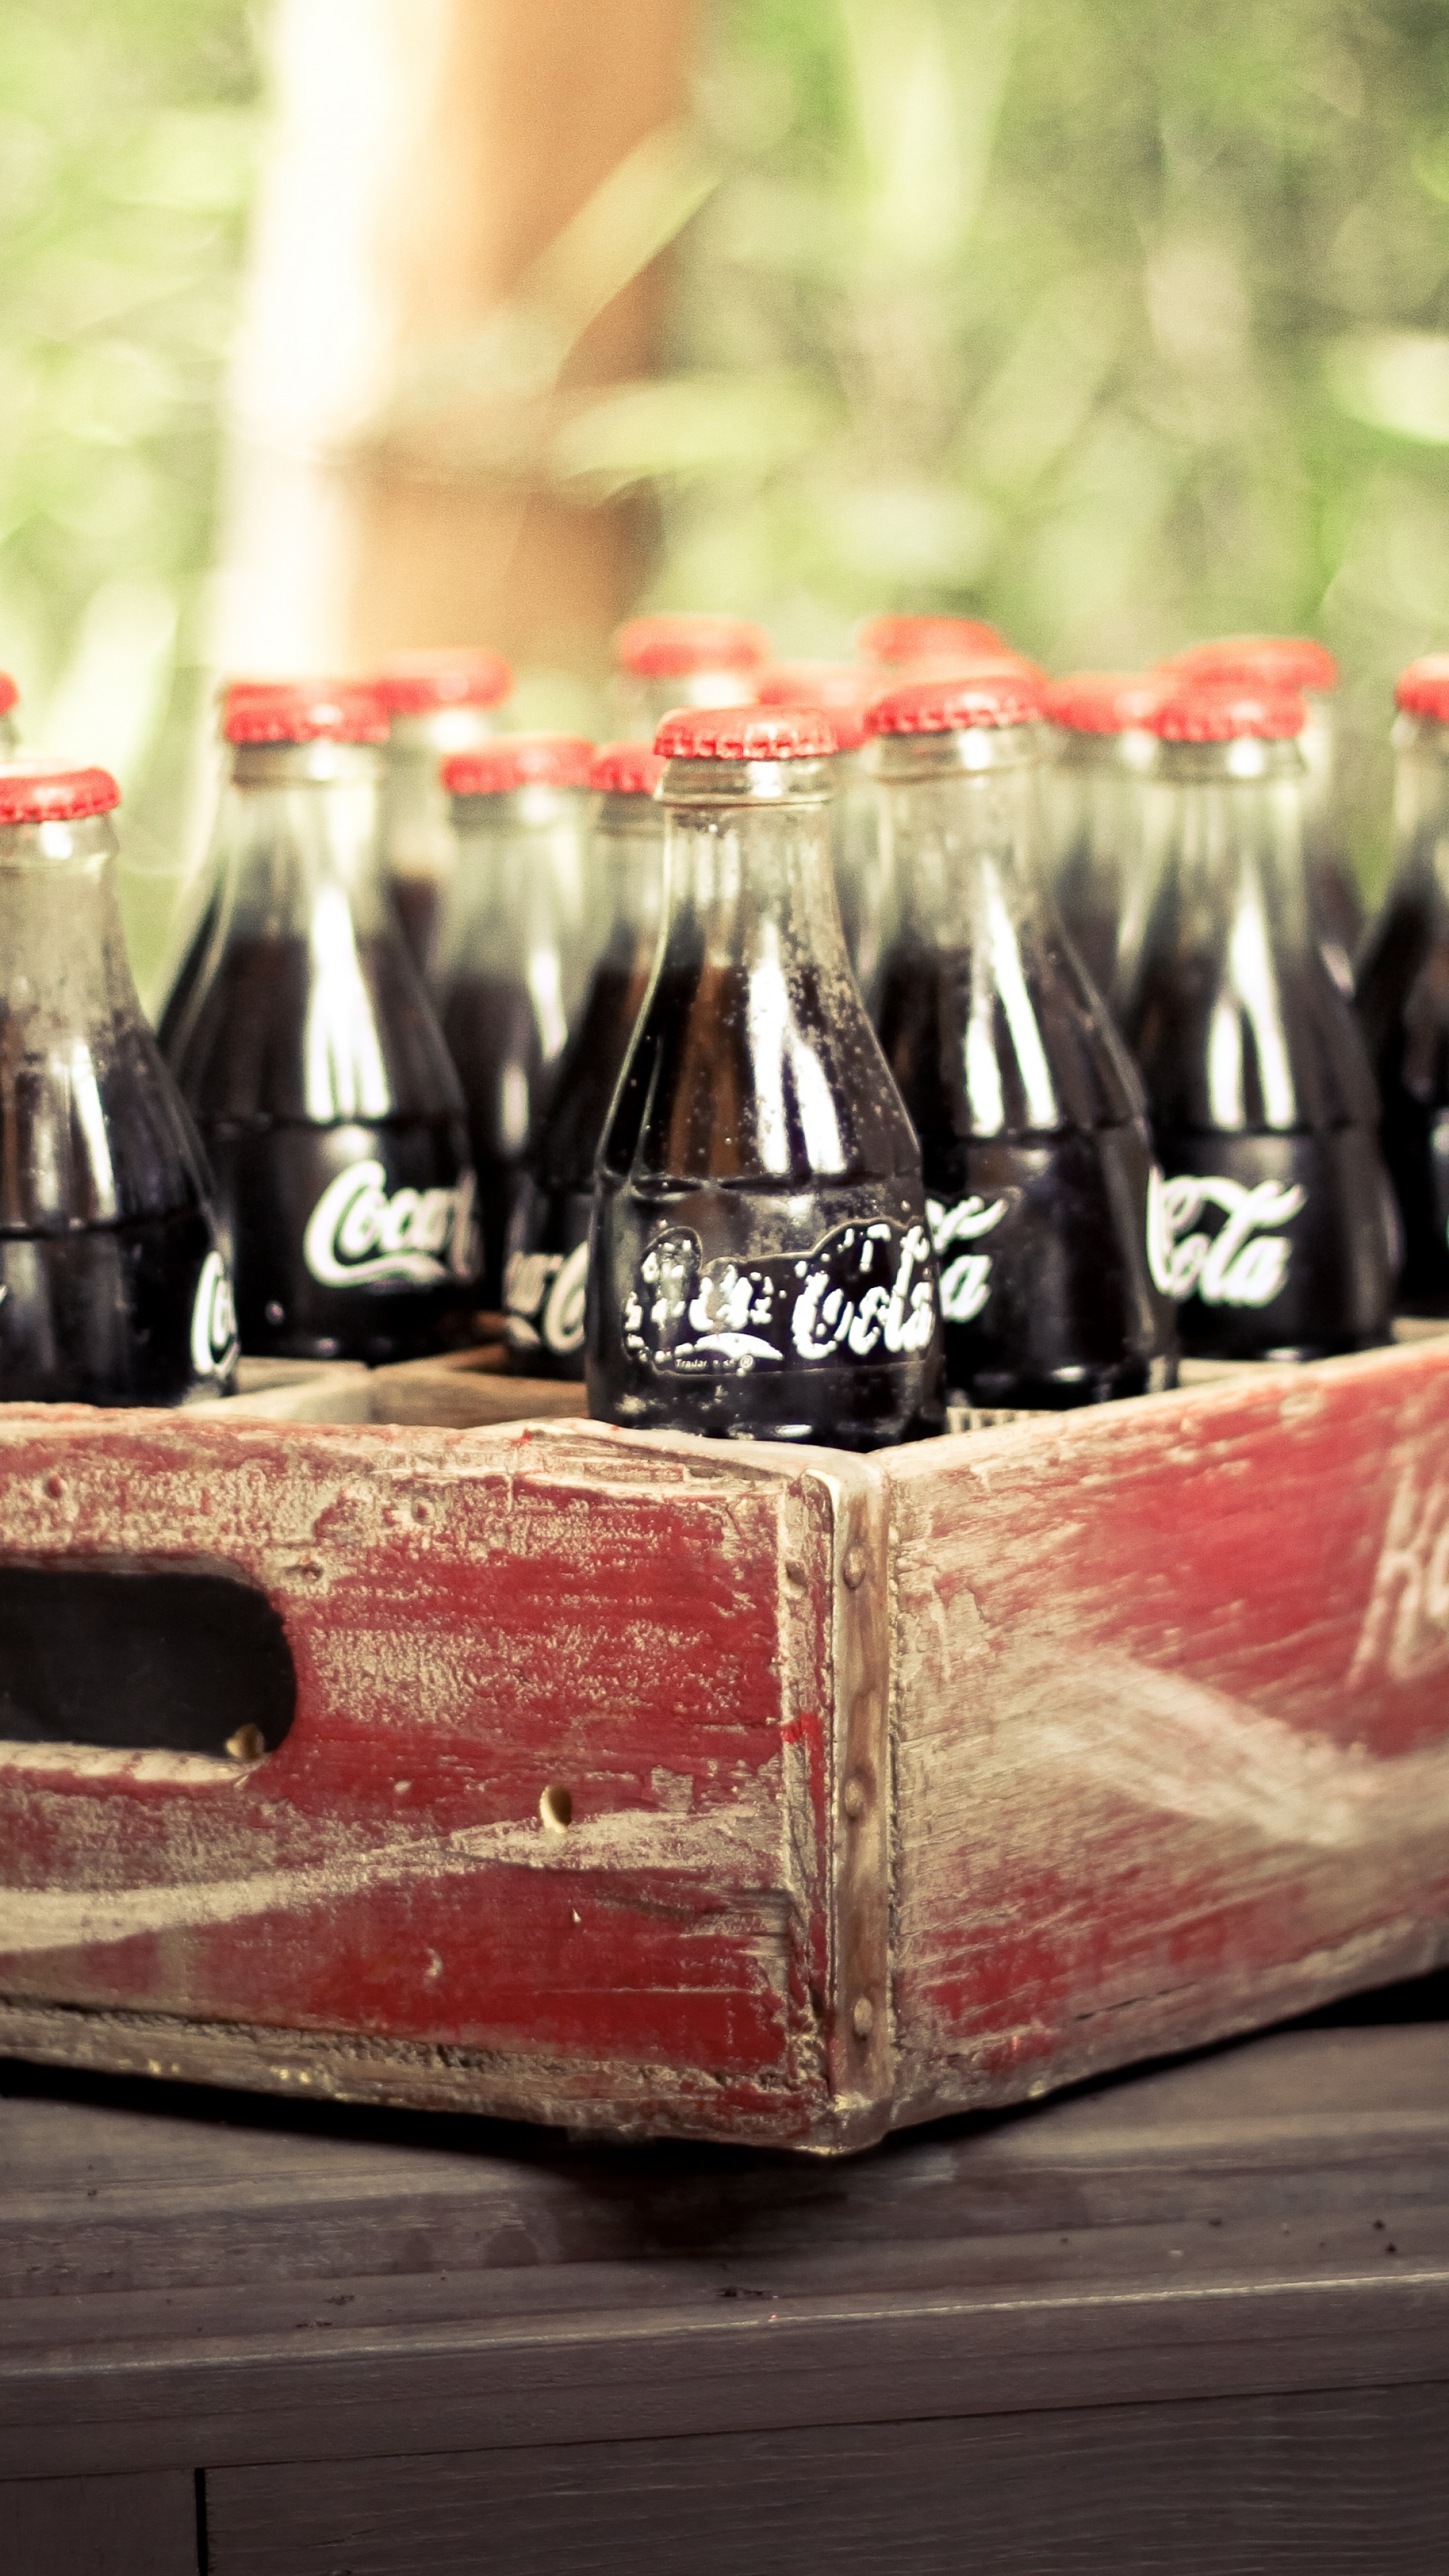 Coca-Cola: Drink, sold in over 200 countries worldwide, Soda. 2160x3840 4K Wallpaper.